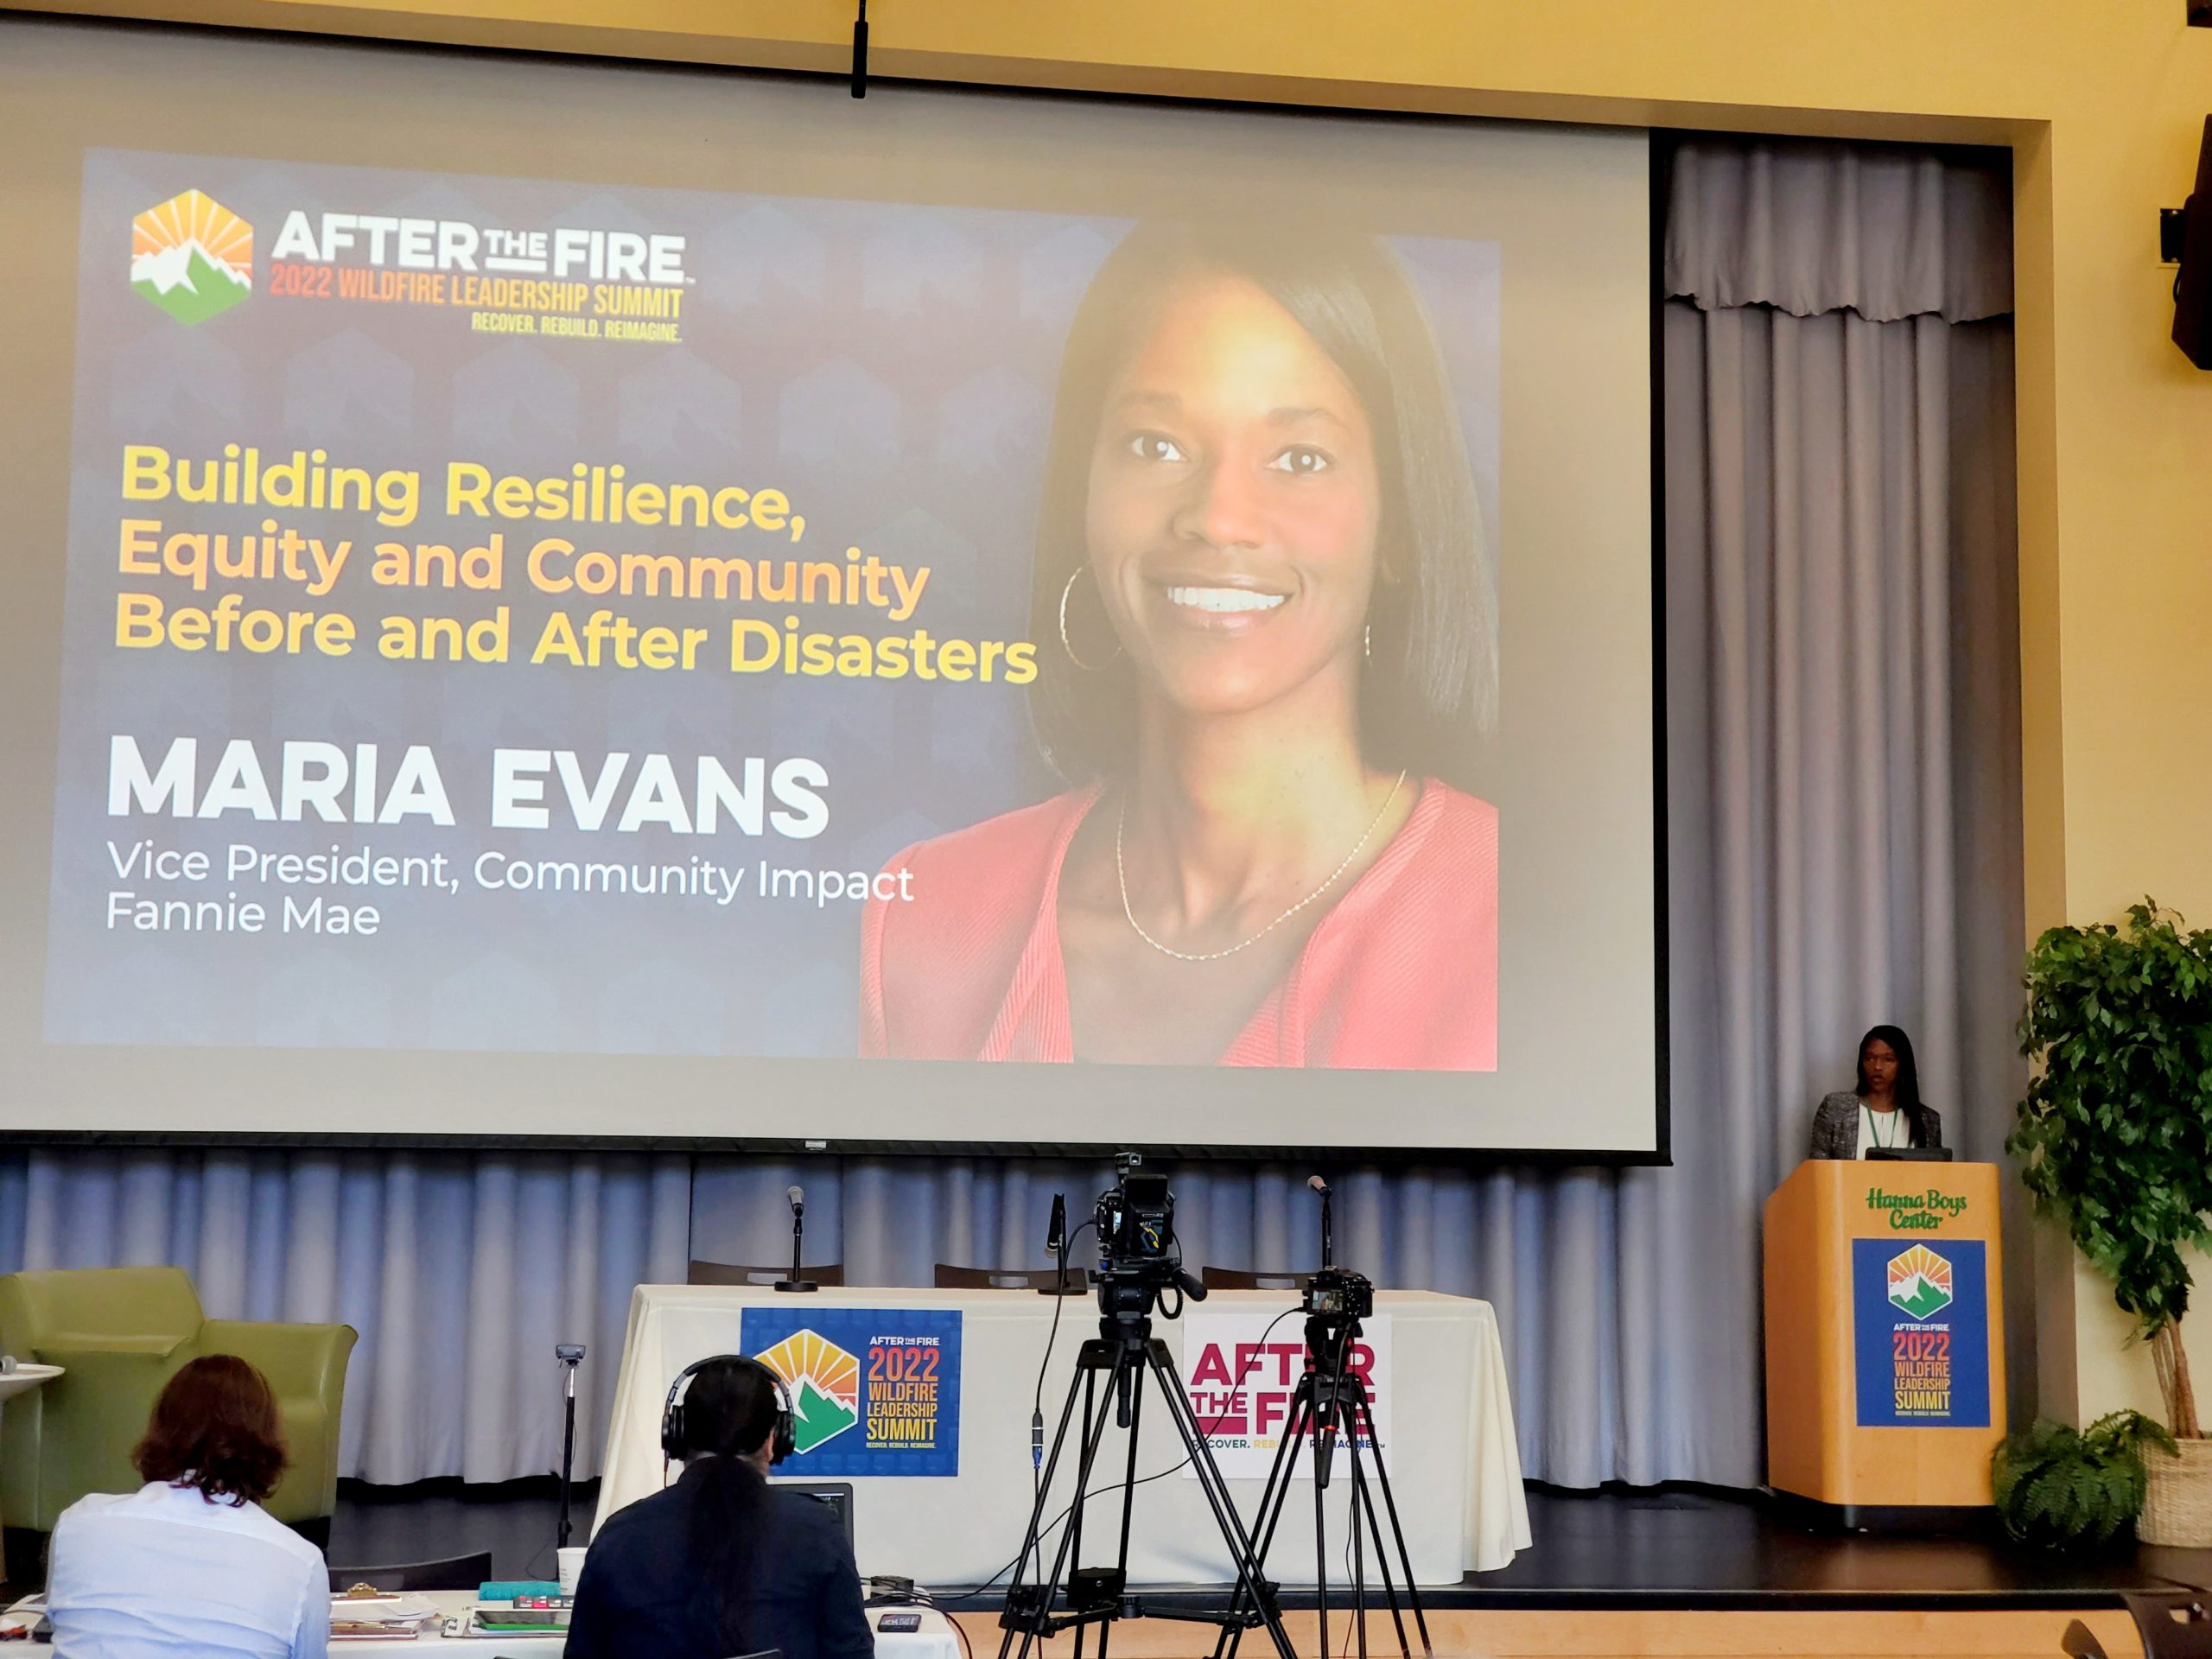 Maria Evans presented a keynote on equity in the community both before and after disaster